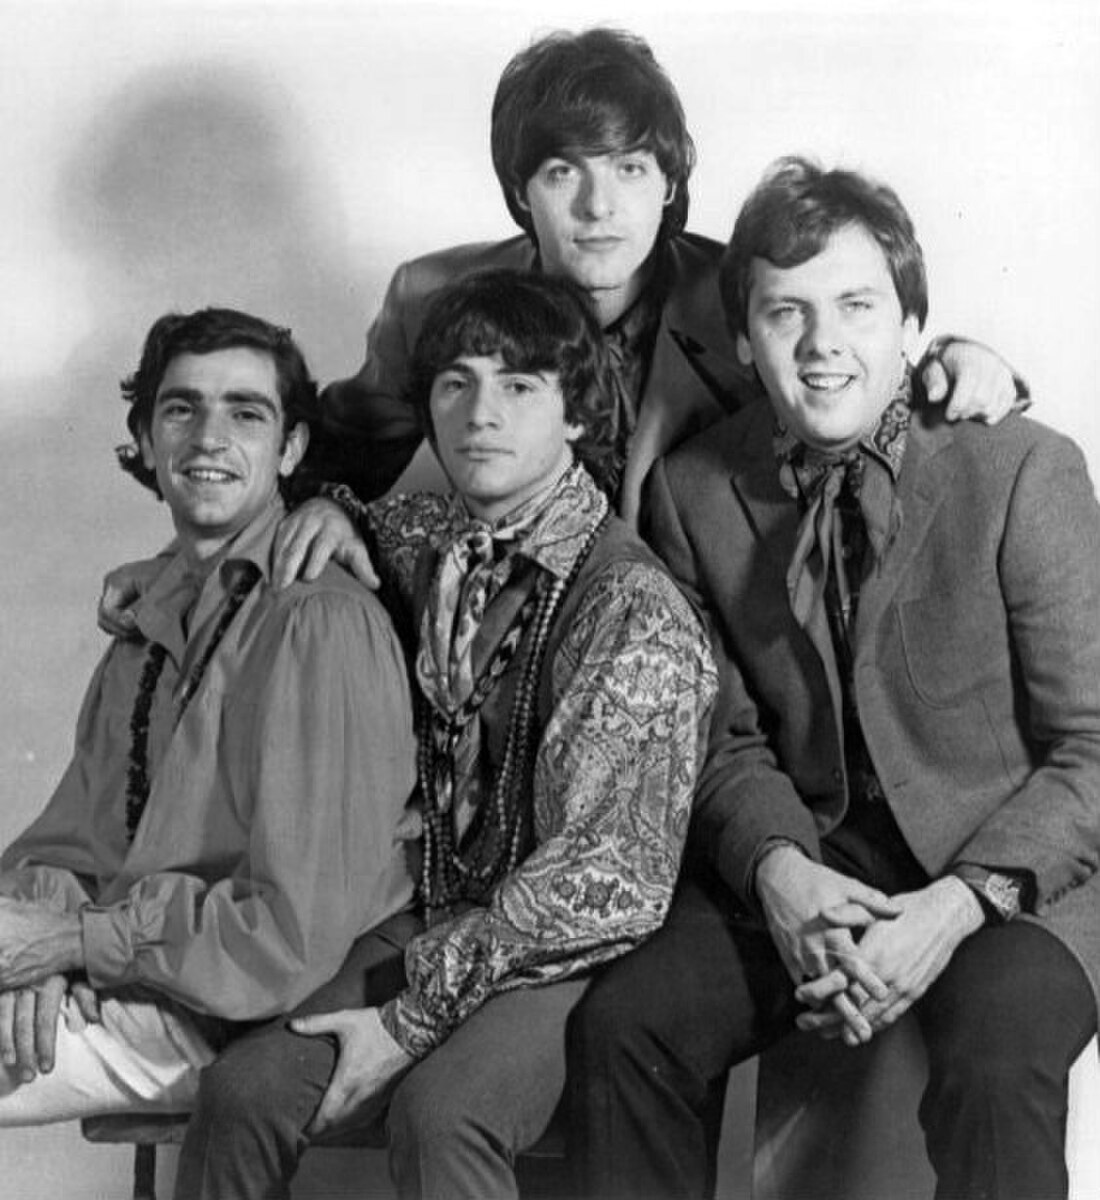 The Rascals - Come on Up